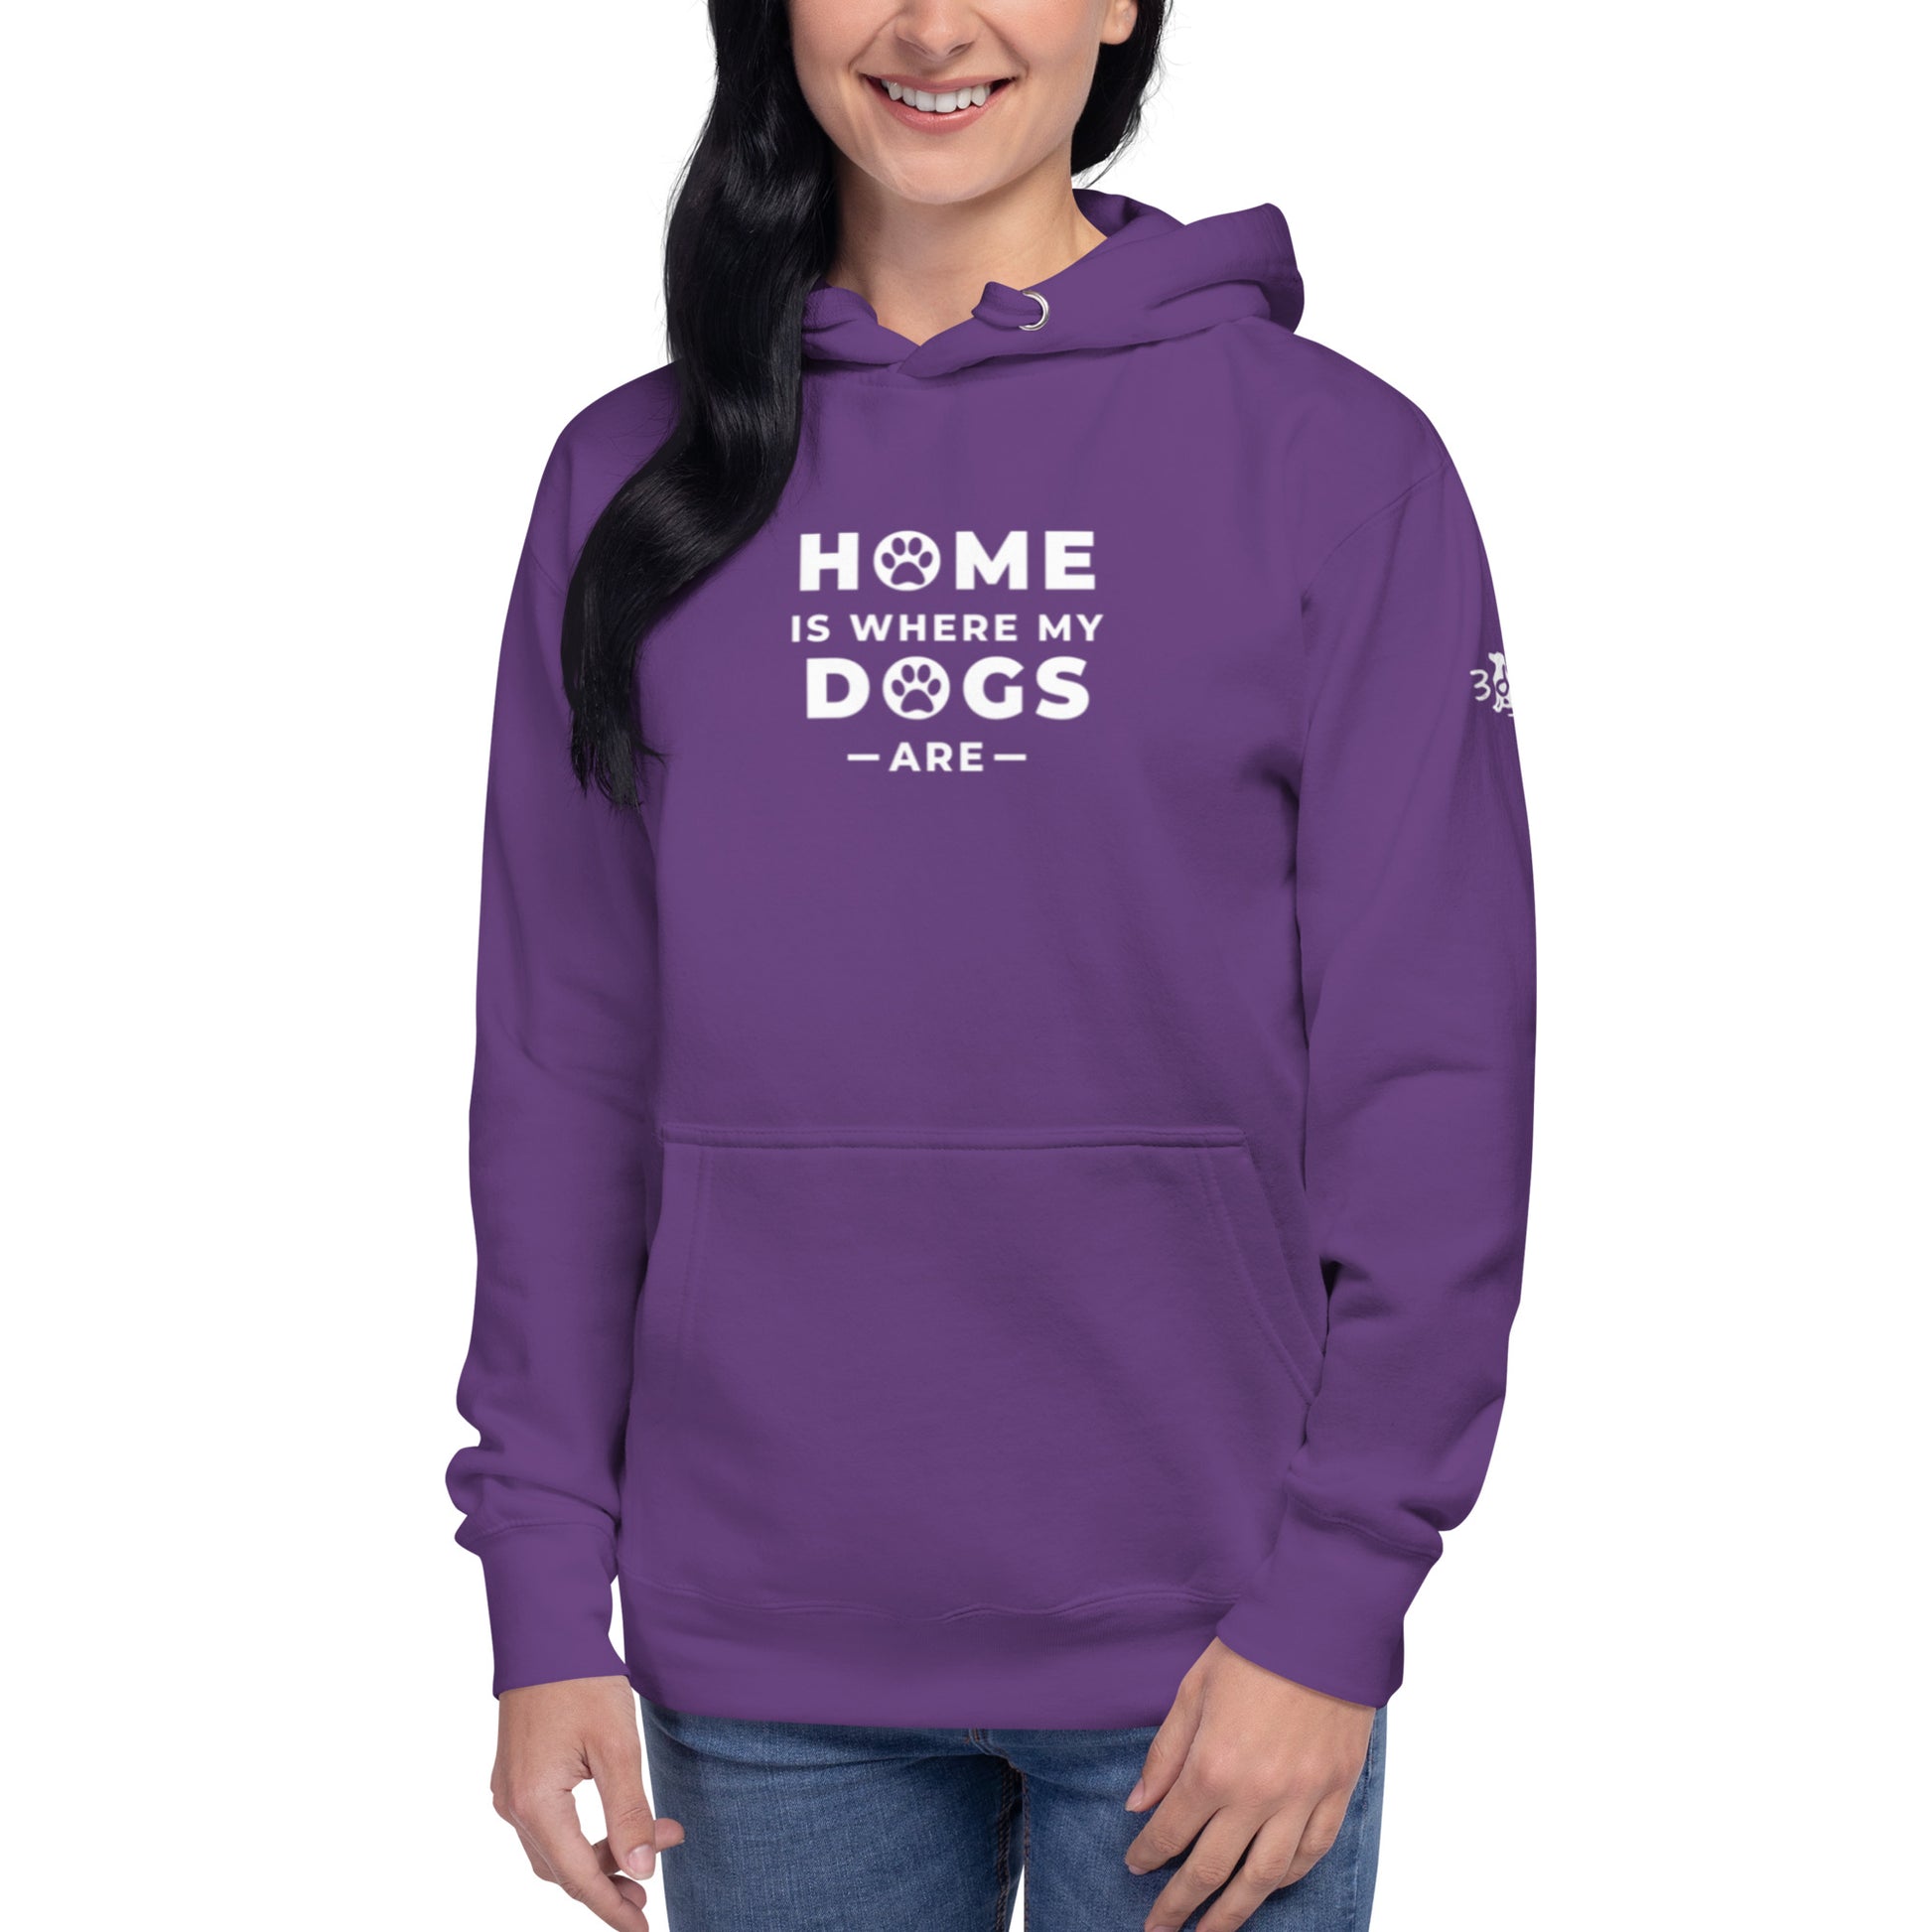 Hoodie with "Home is where my dogs are" Print on front, 3DD logo on left sleeve